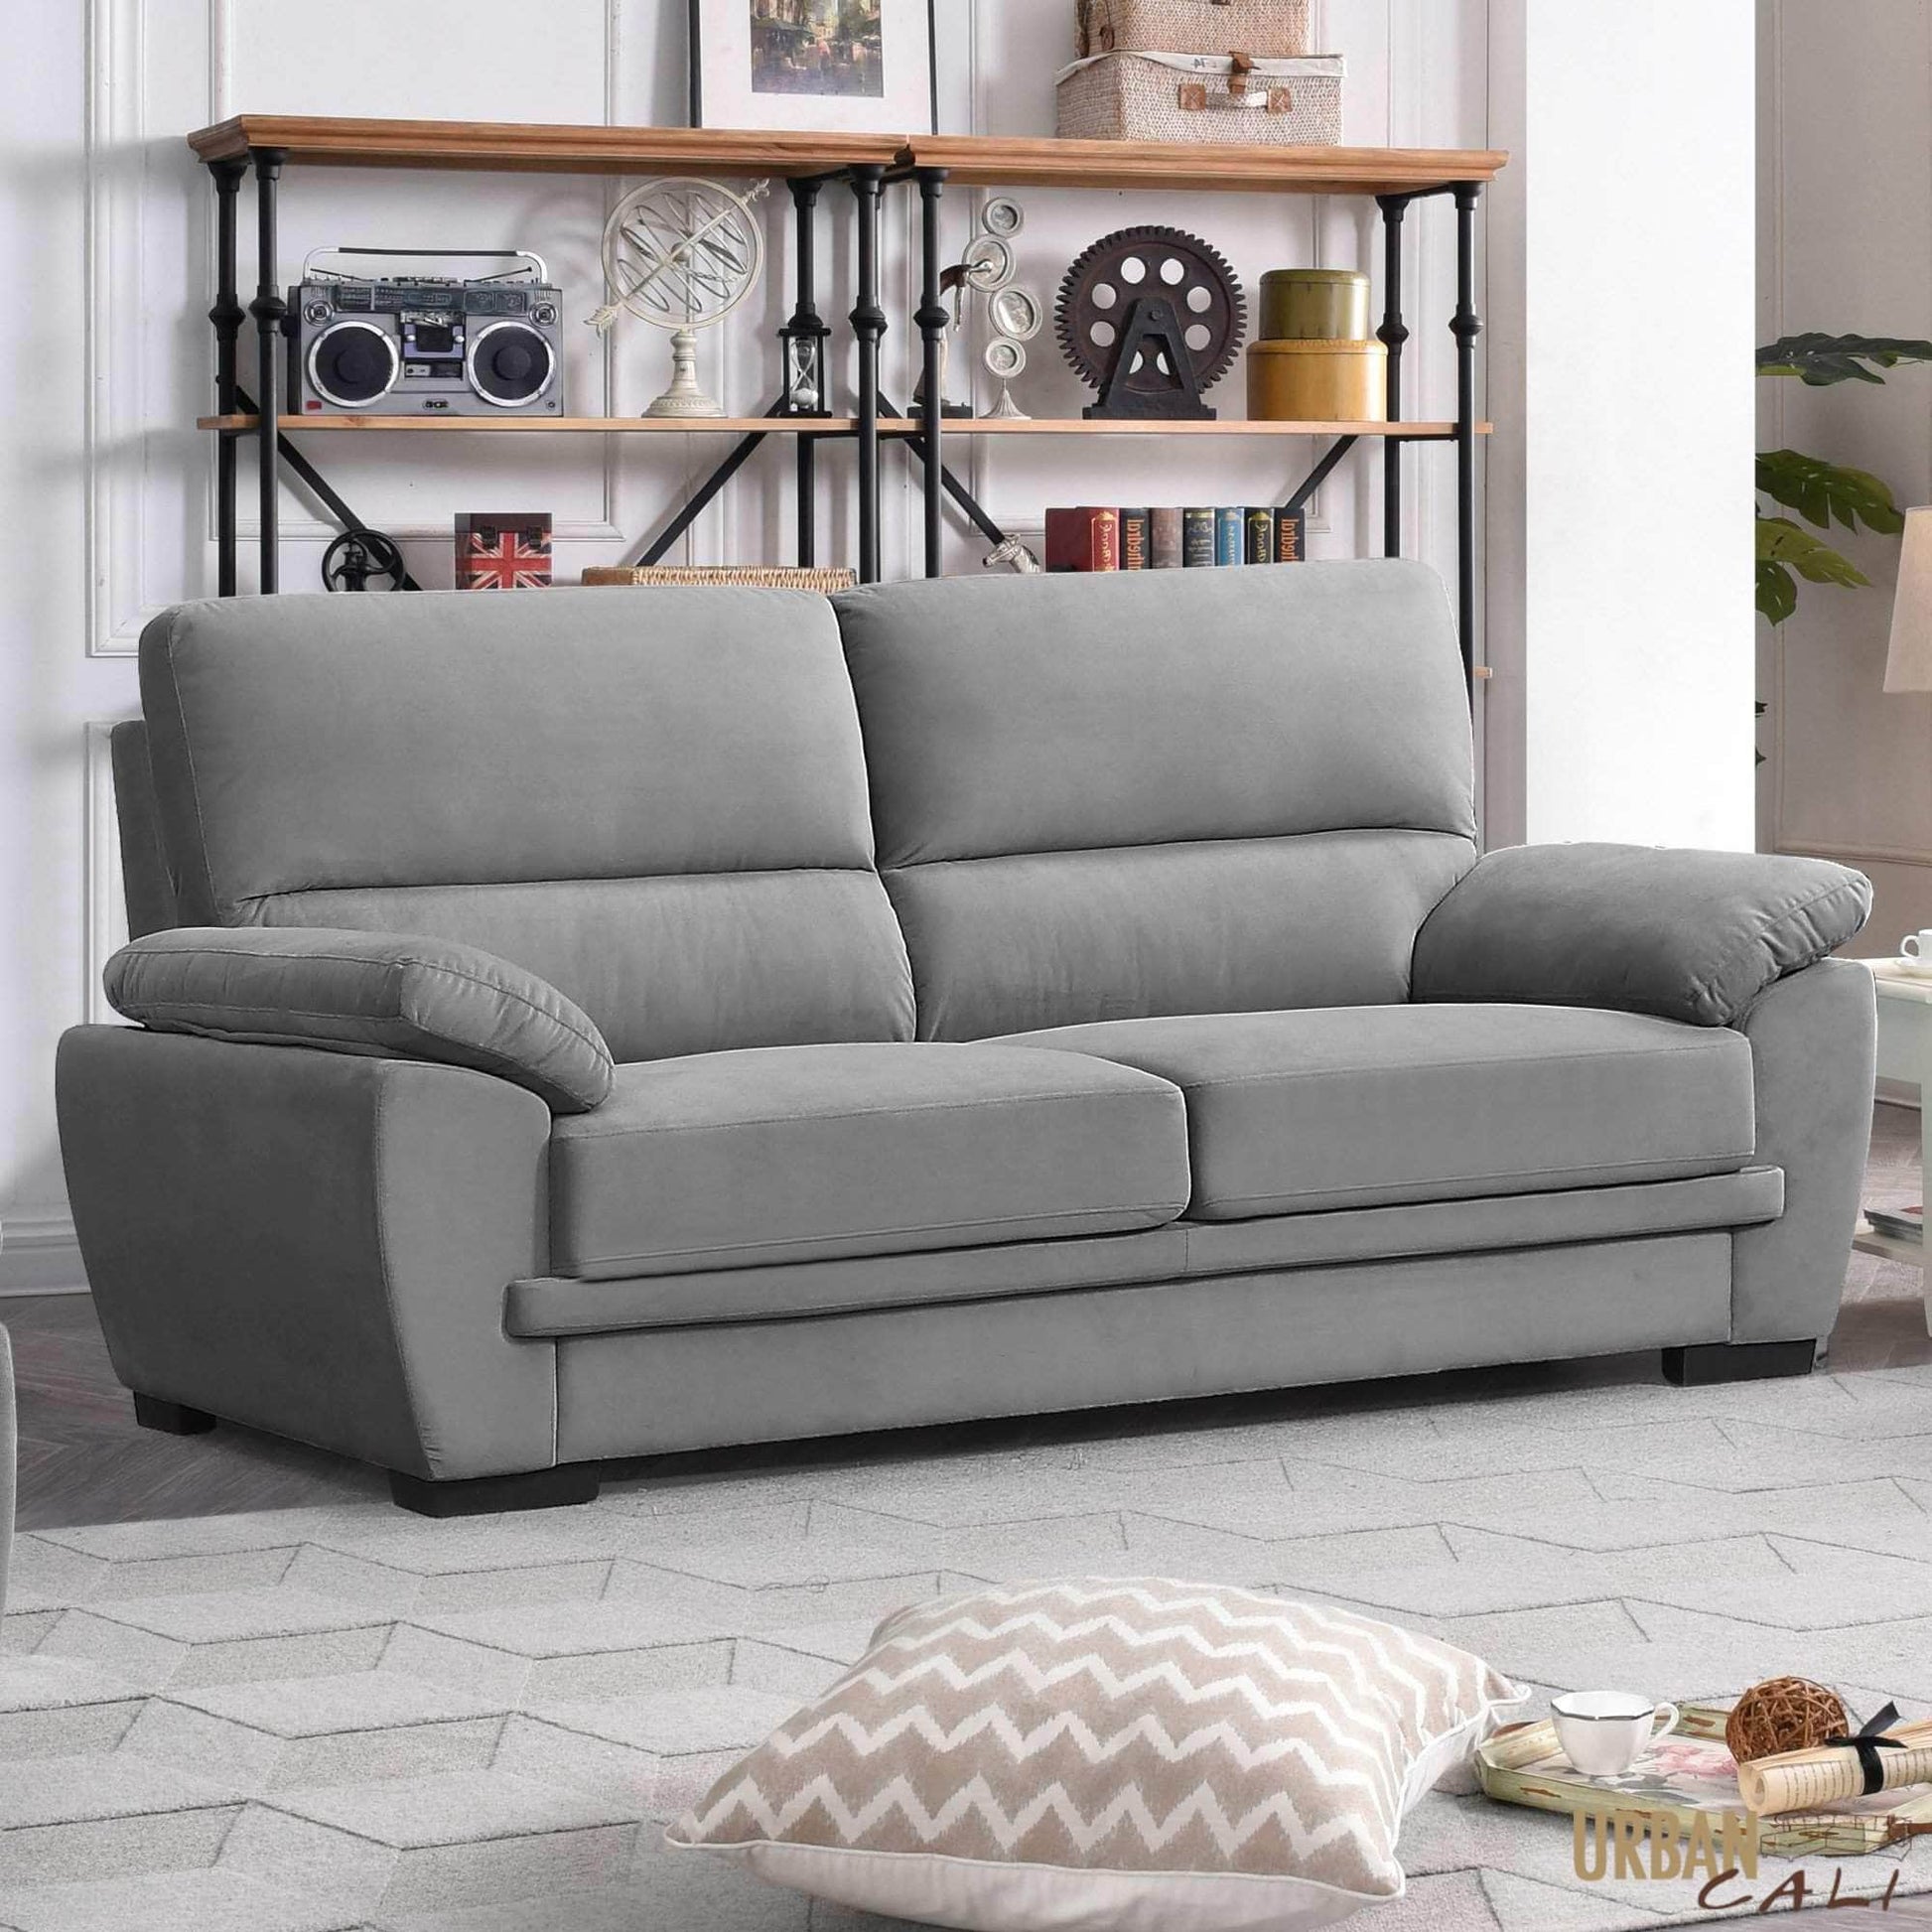 Pending - Urban Cali Light Grey Monterey 82" Pillow Top Arm Sofa in Cotton Fabric - Available in 2 Colours